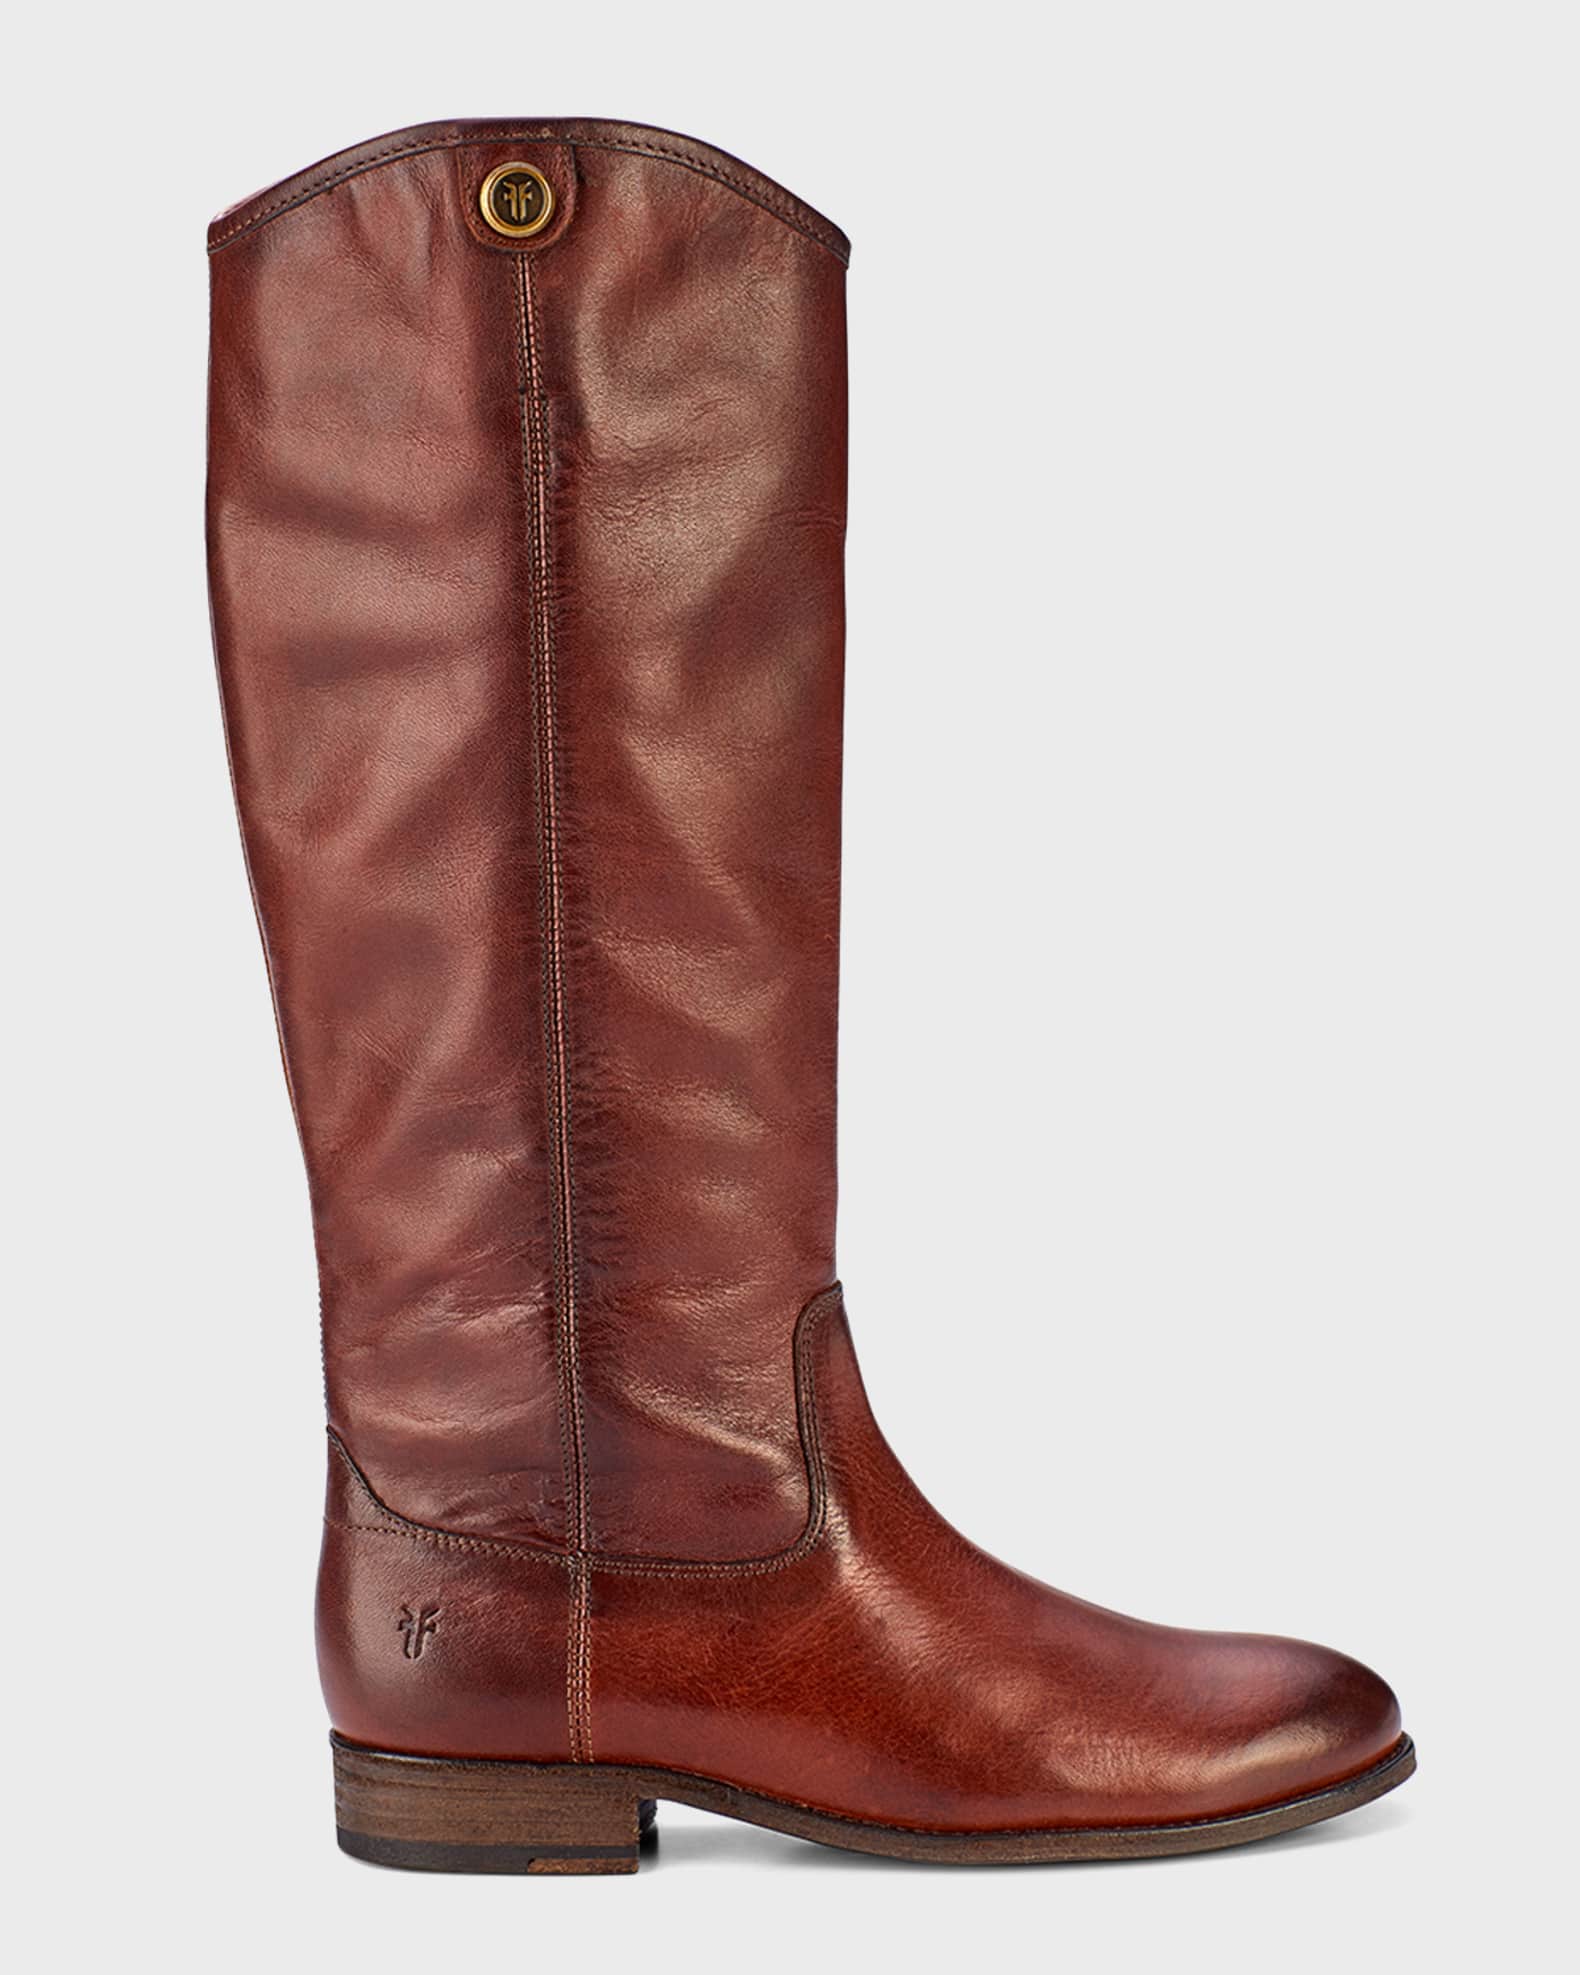 Frye Melissa Button 2 Leather Boots | Neiman Marcus